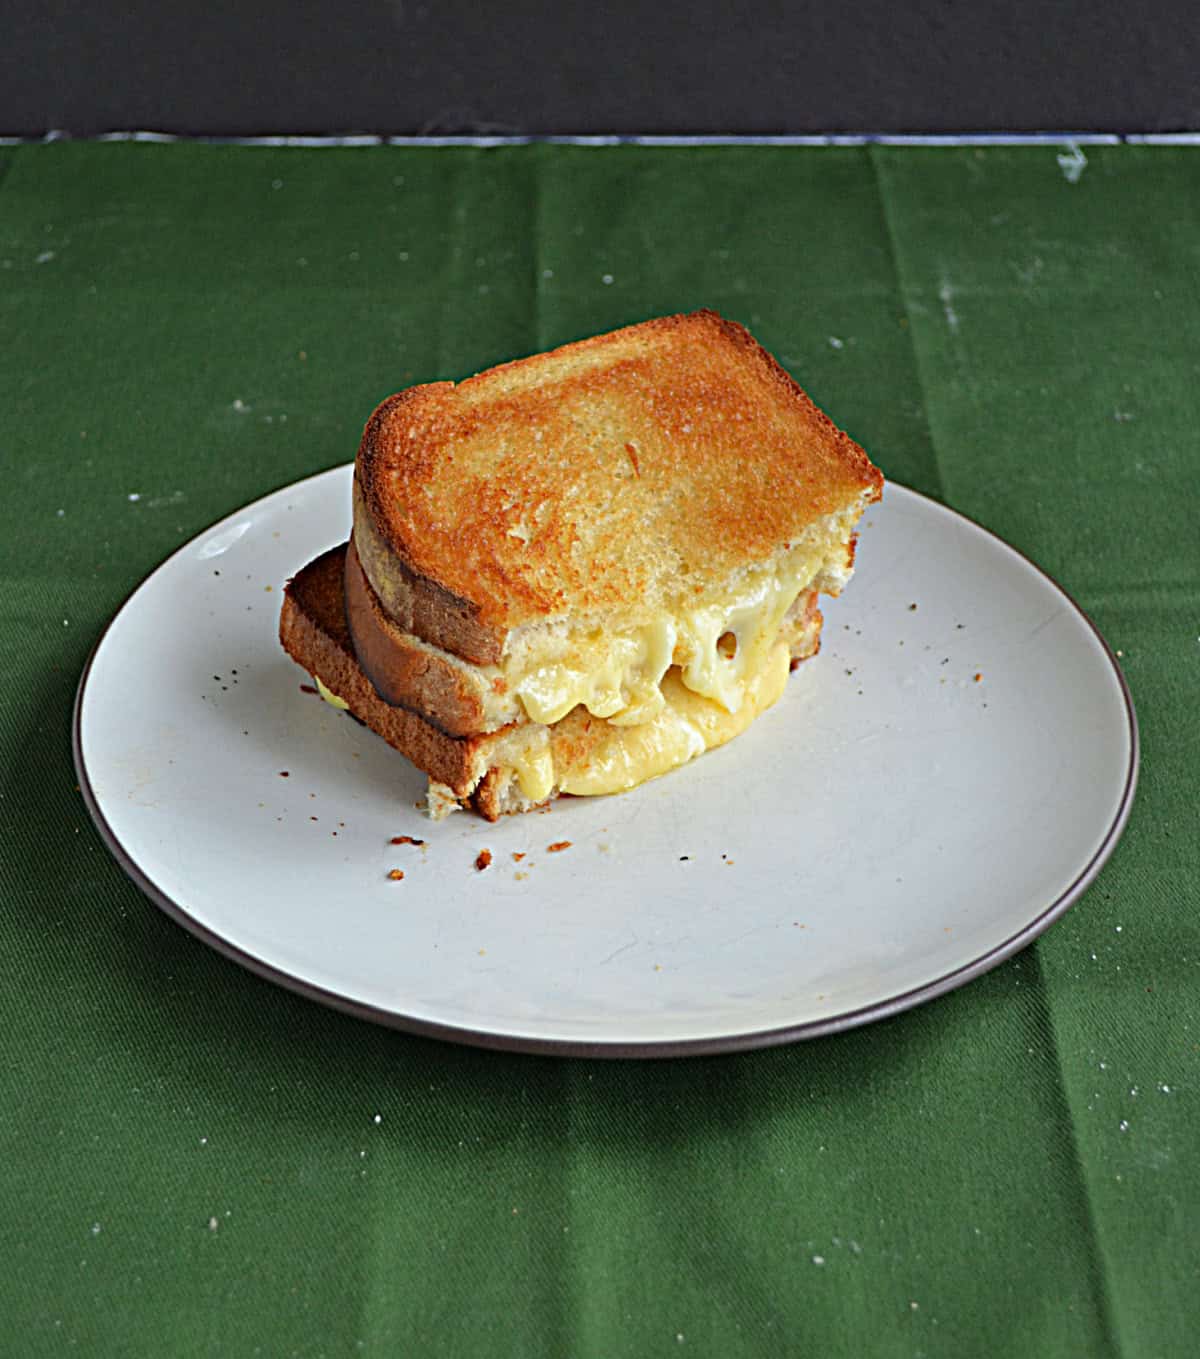 A plate with a grilled cheese sandwich cut in half and stacked.